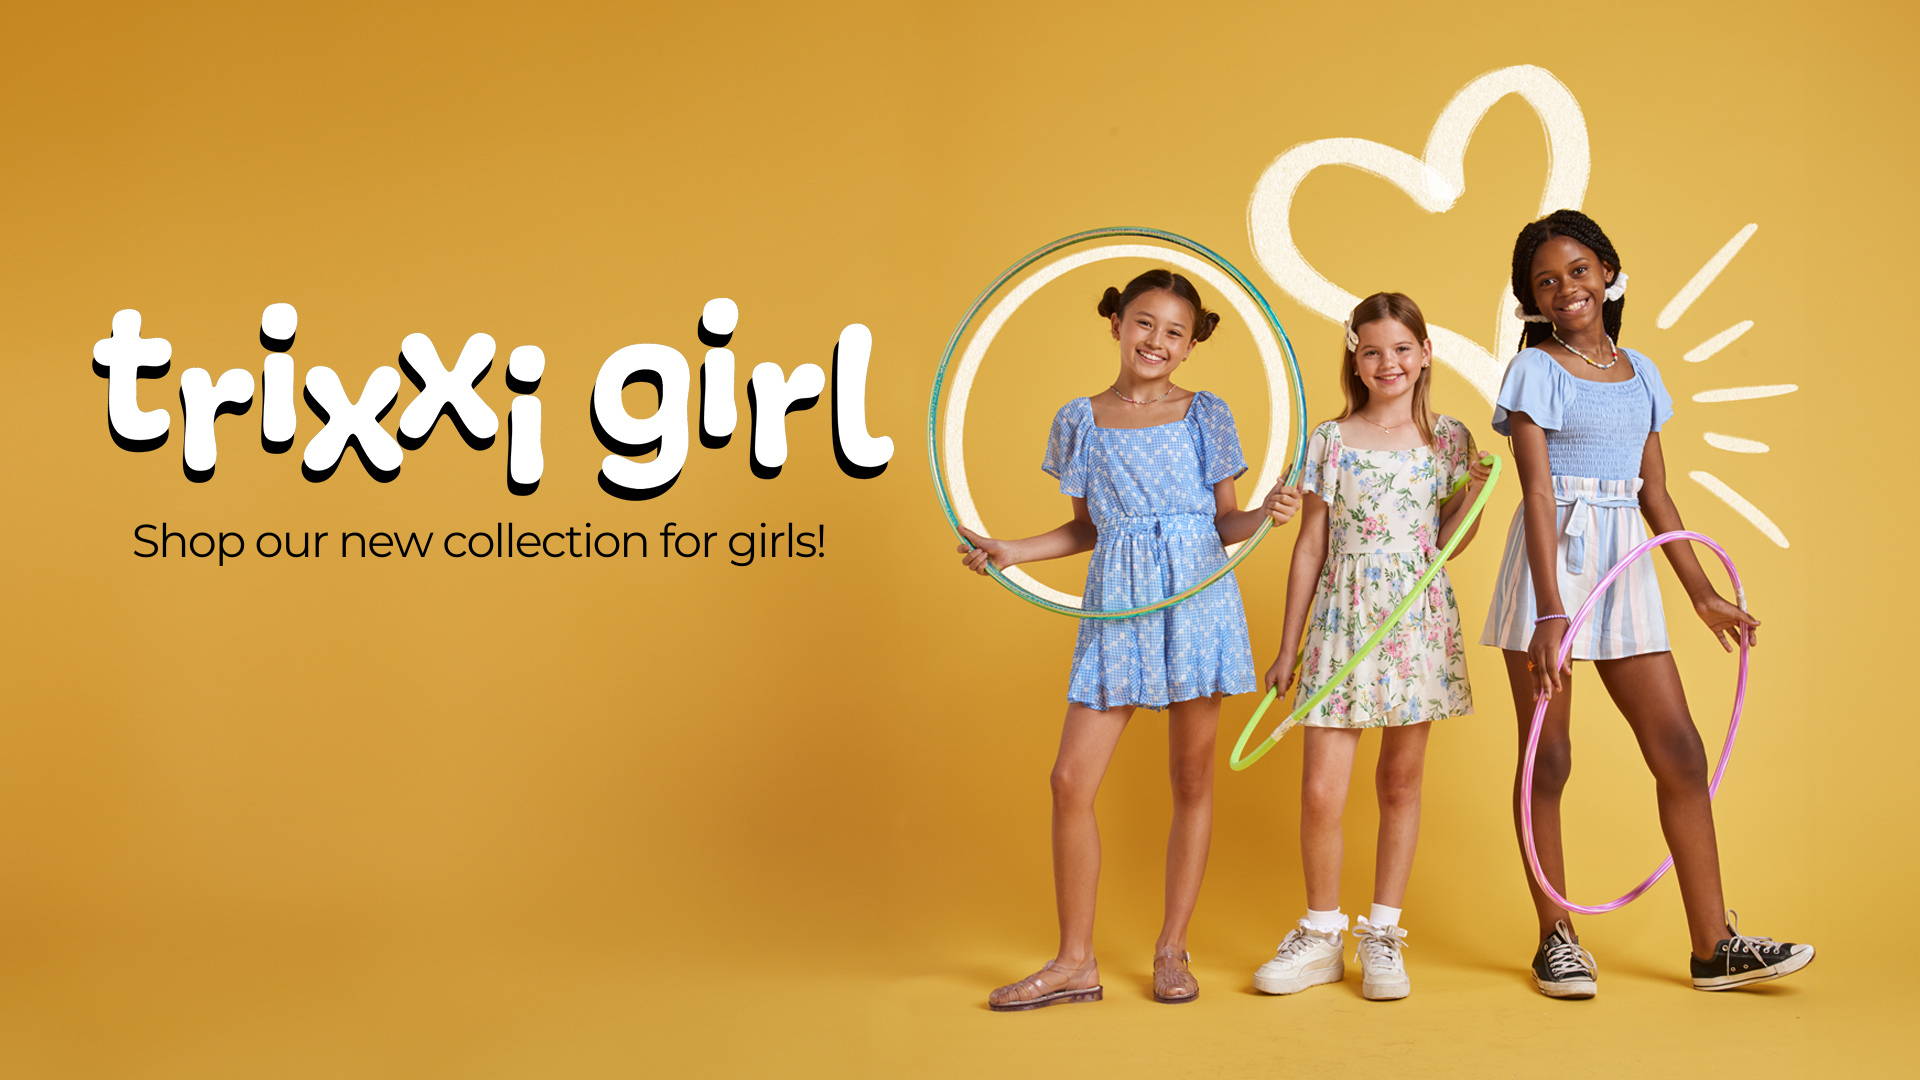 Trixxi girl collection, shop our new collection for girls link with three girls in Trixxi floral dresses for girls sizes playing with hoola hoops.